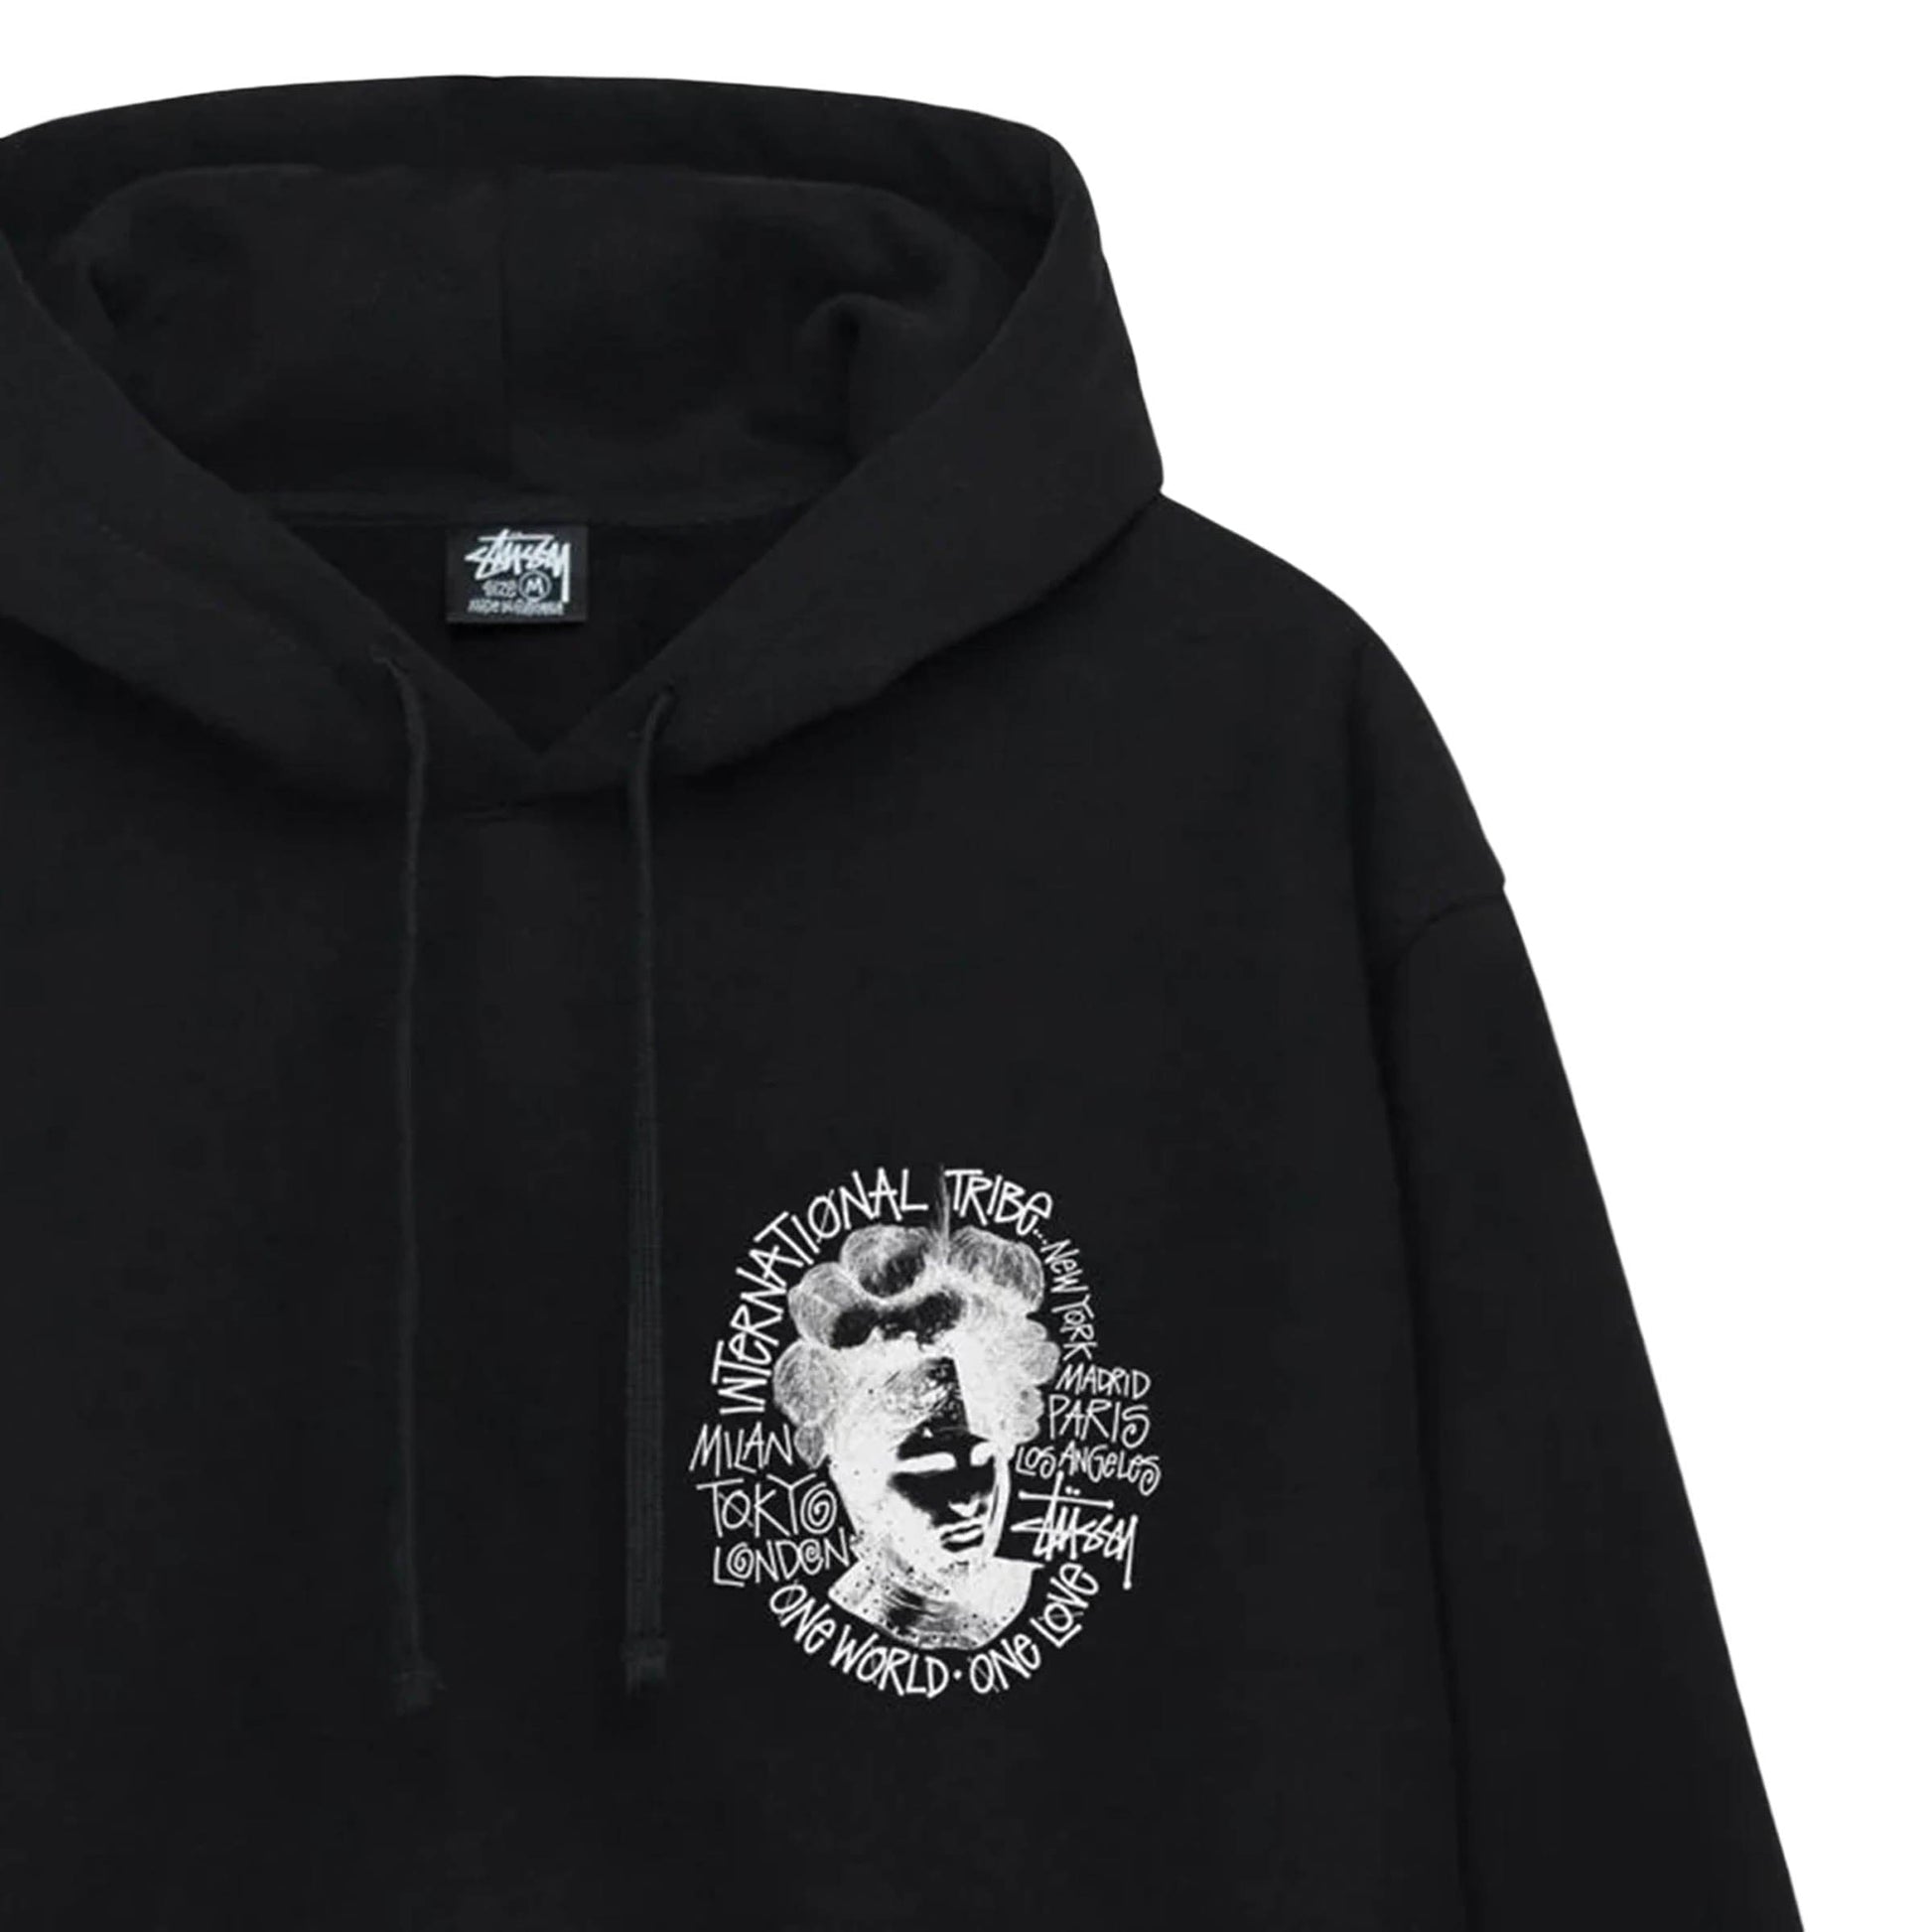 Stussy In 60 years of wearing m and s clothing have I felt so dissatisfied CAMELOT HOODIE